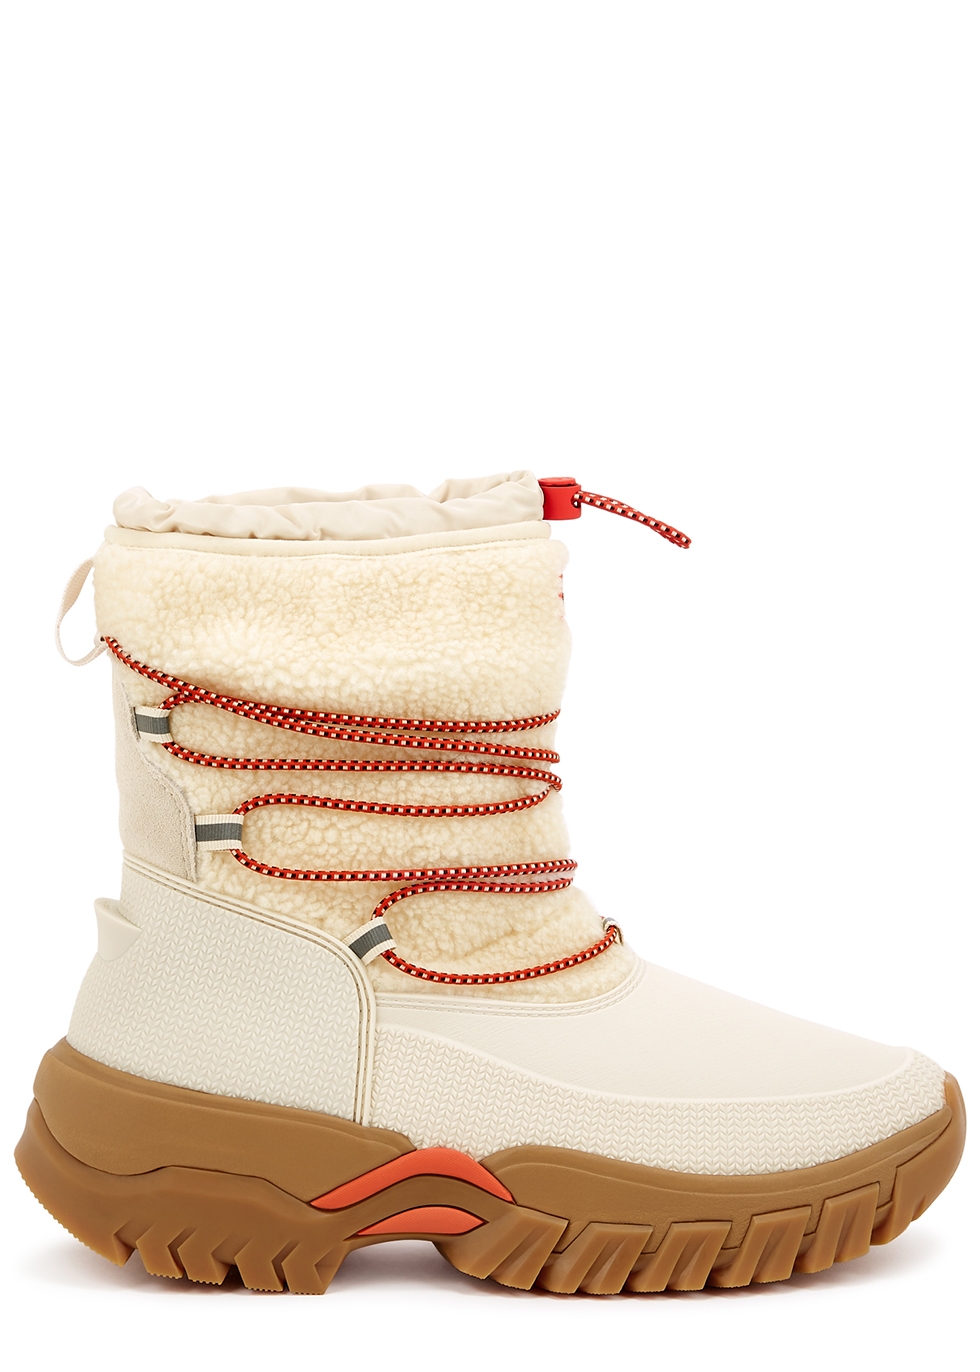 Harvey Nichols Women Shoes Boots Snow Boots Wanderer panelled shearling snow boots 